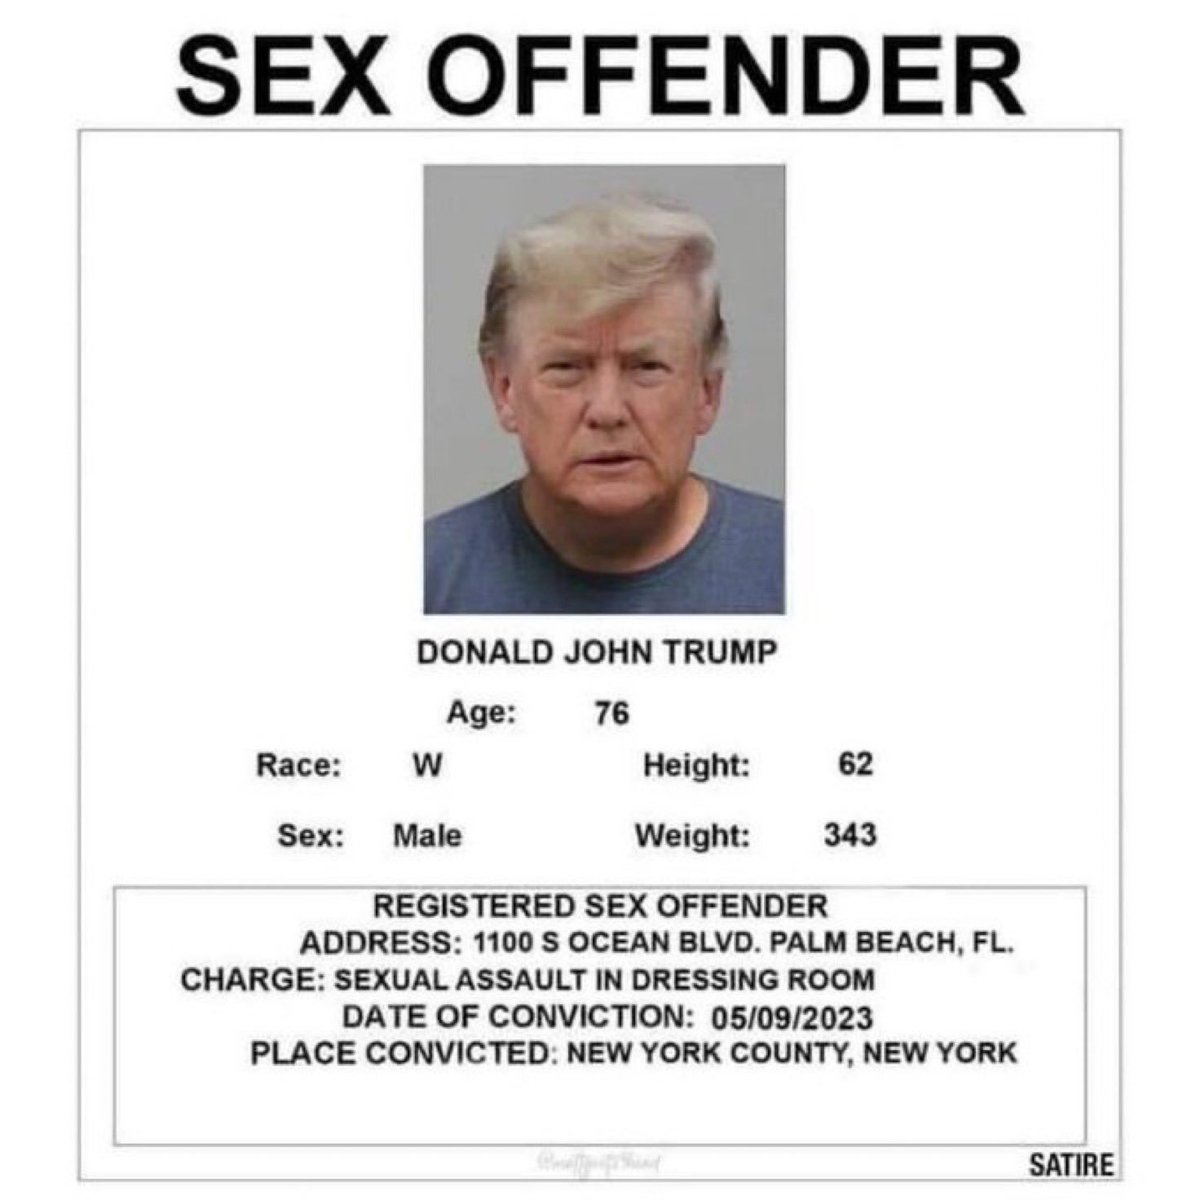 Mar-a-Lago EVERYONE KNOWS that having a convicted sex offender living as a permanent resident on a property will SIGNIFICANTLY drive that property's value down!